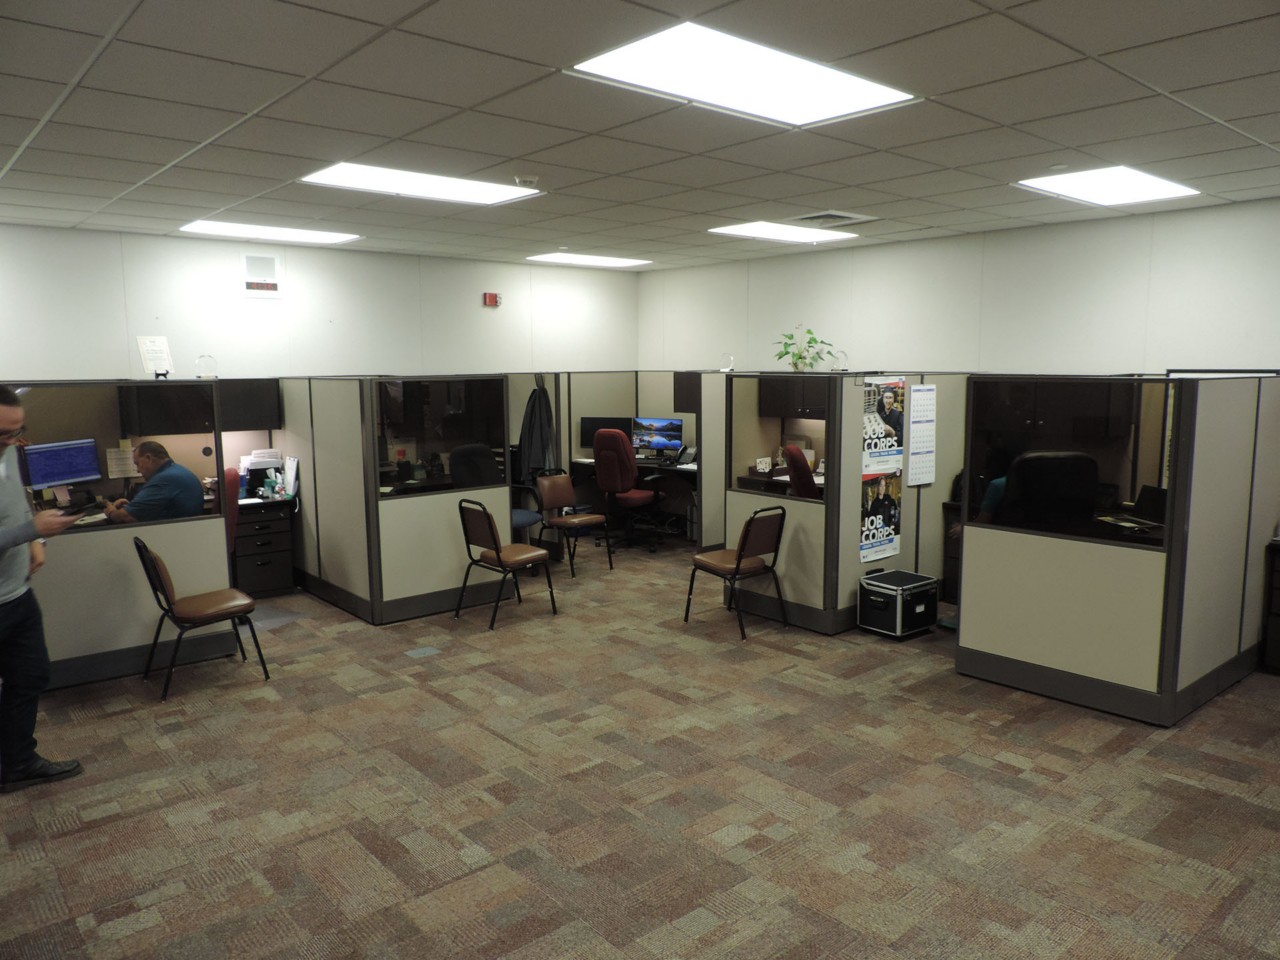 Area with individual offices/cubicles where individuals may have appointments or individualized career services.